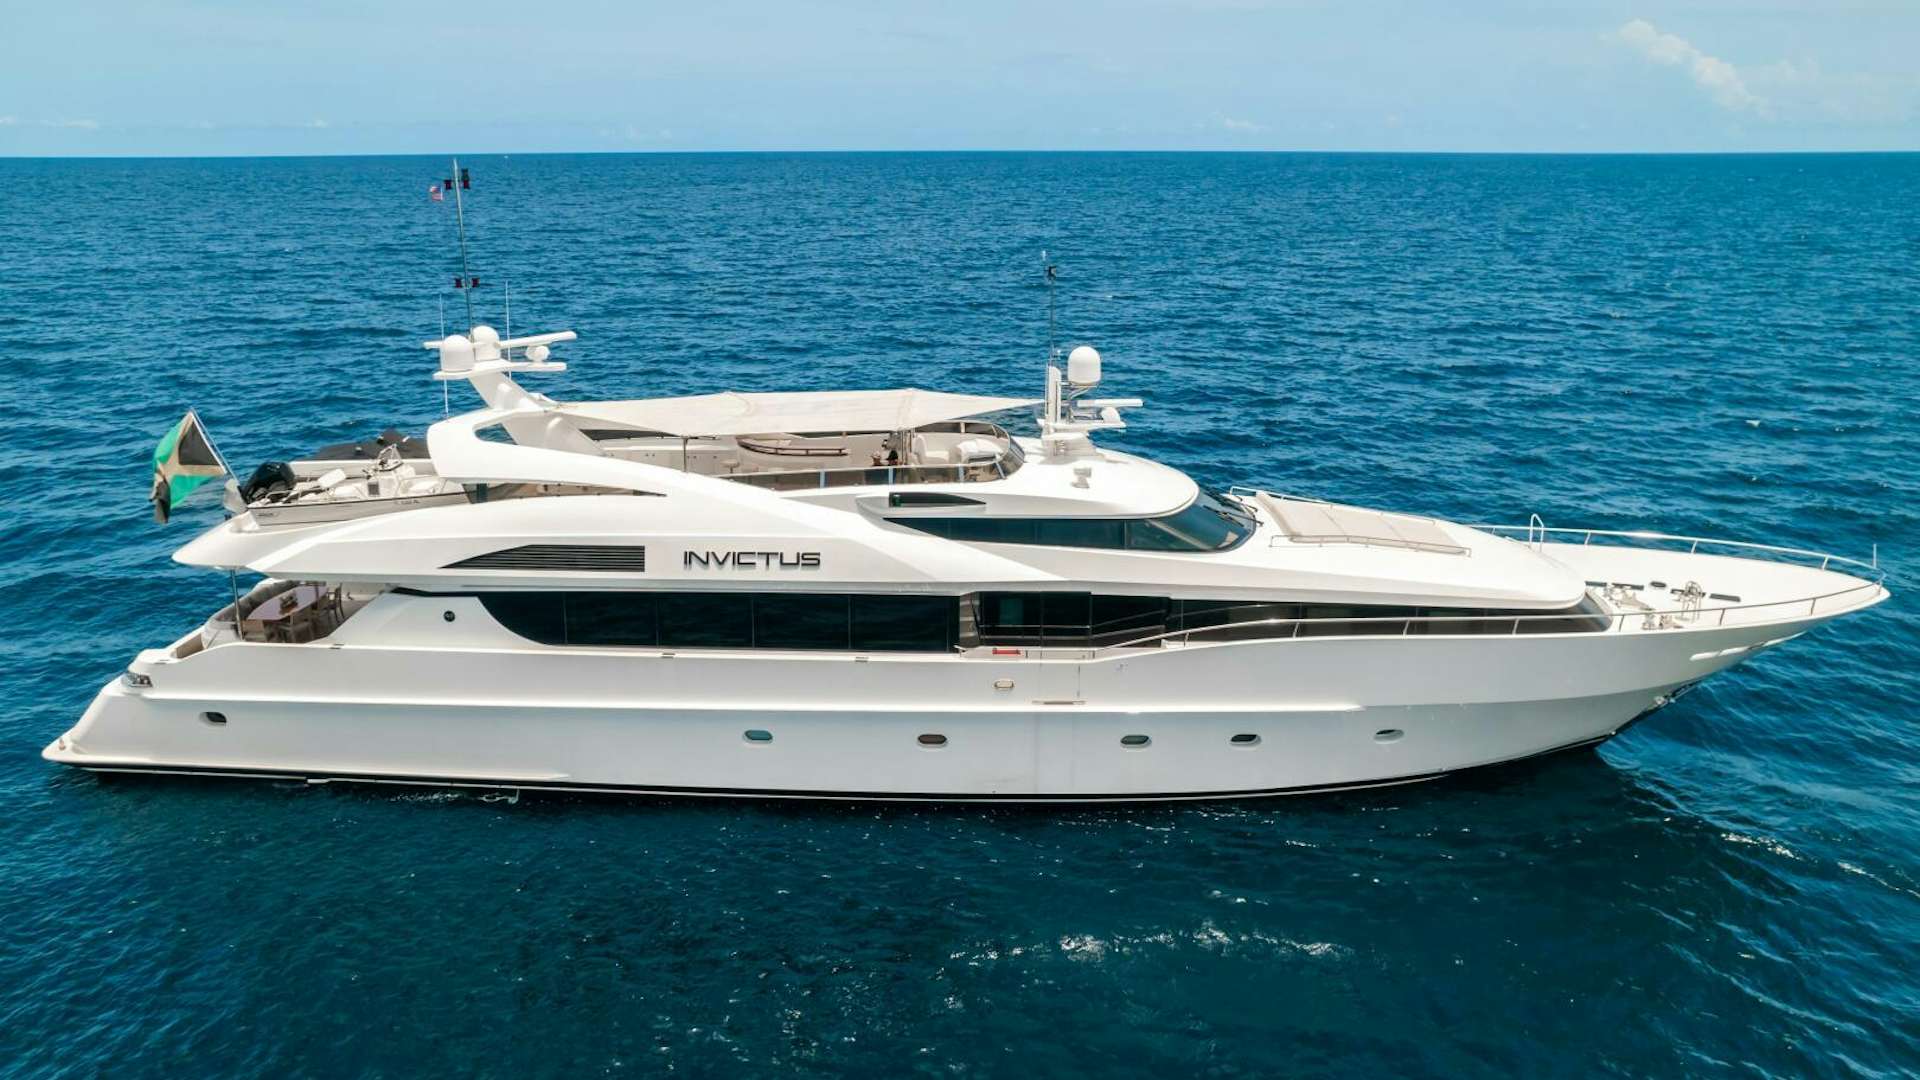 Watch Video for INVICTUS Yacht for Sale